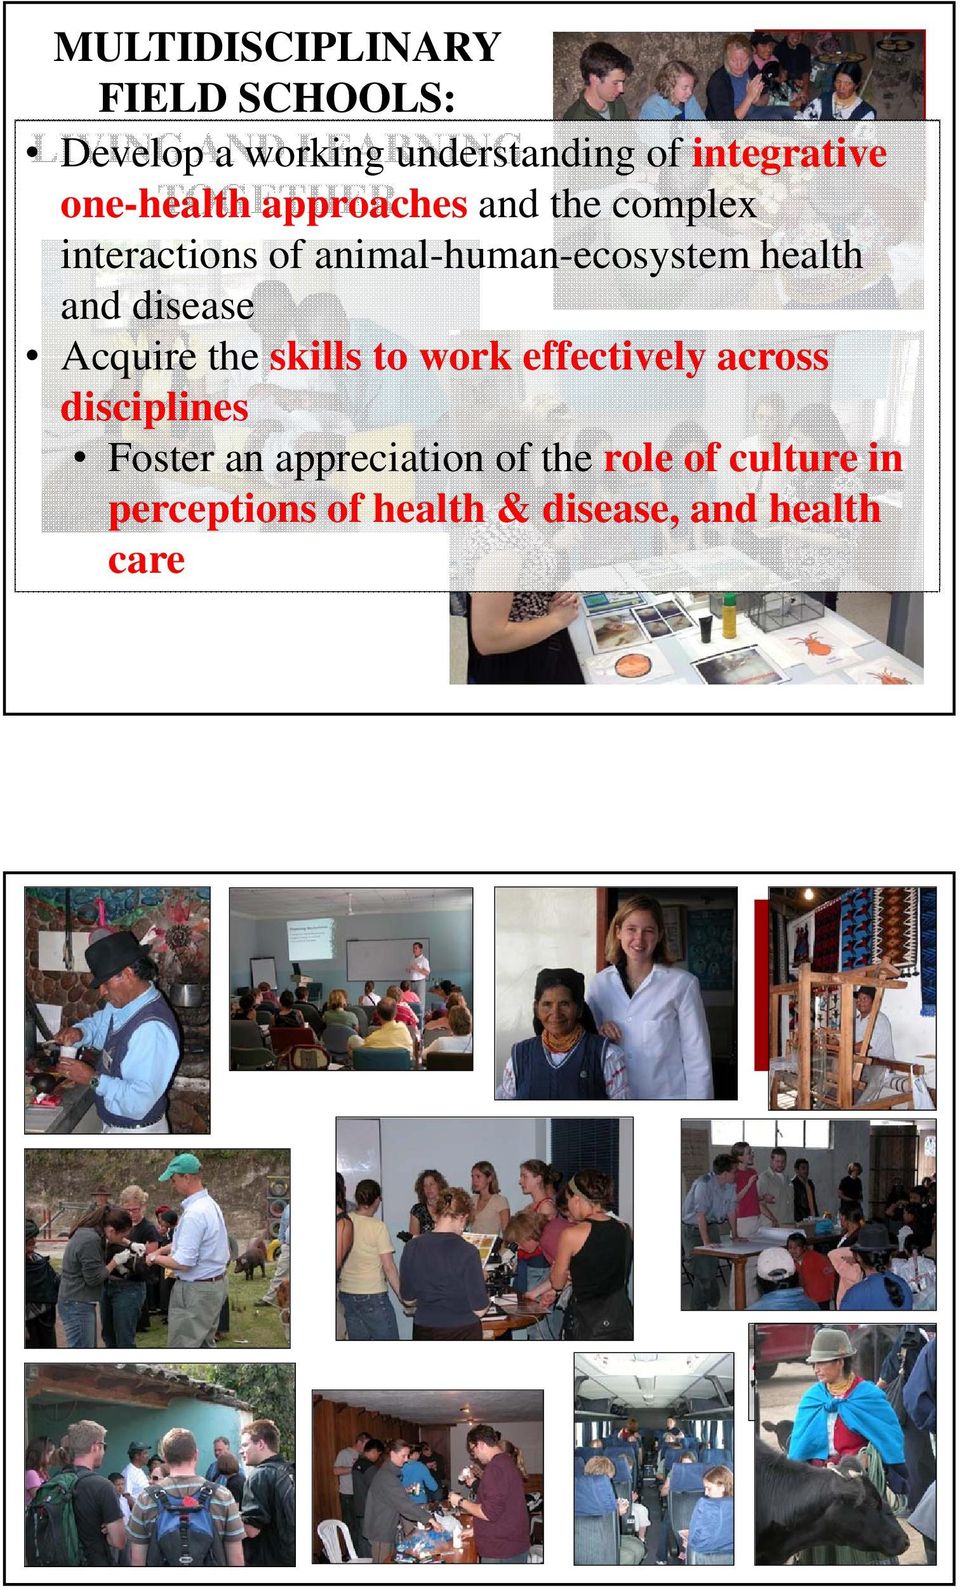 animal-human-ecosystem health and disease Acquire the skills to work effectively across